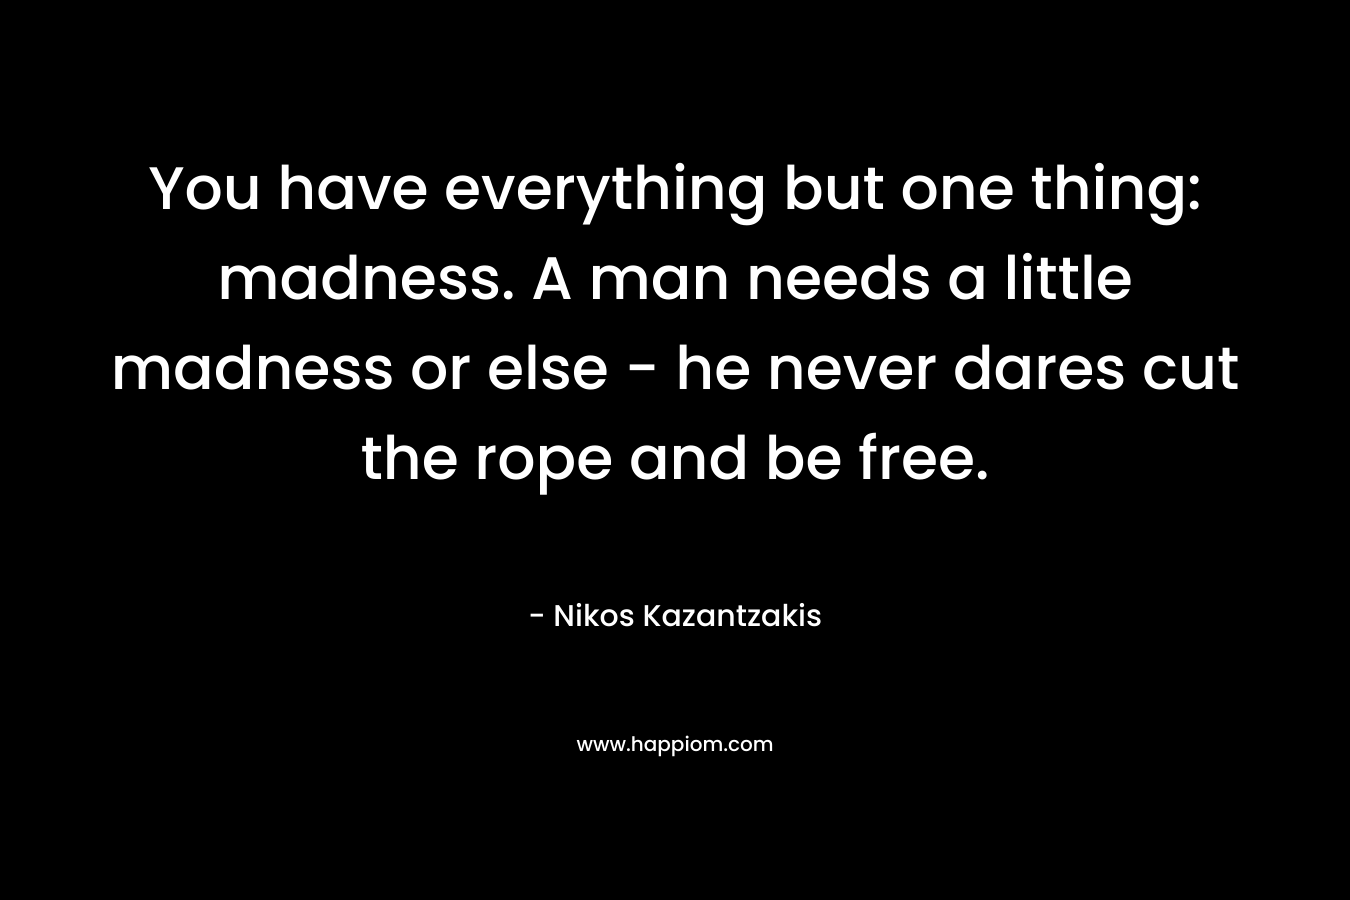 You have everything but one thing: madness. A man needs a little madness or else – he never dares cut the rope and be free. – Nikos Kazantzakis